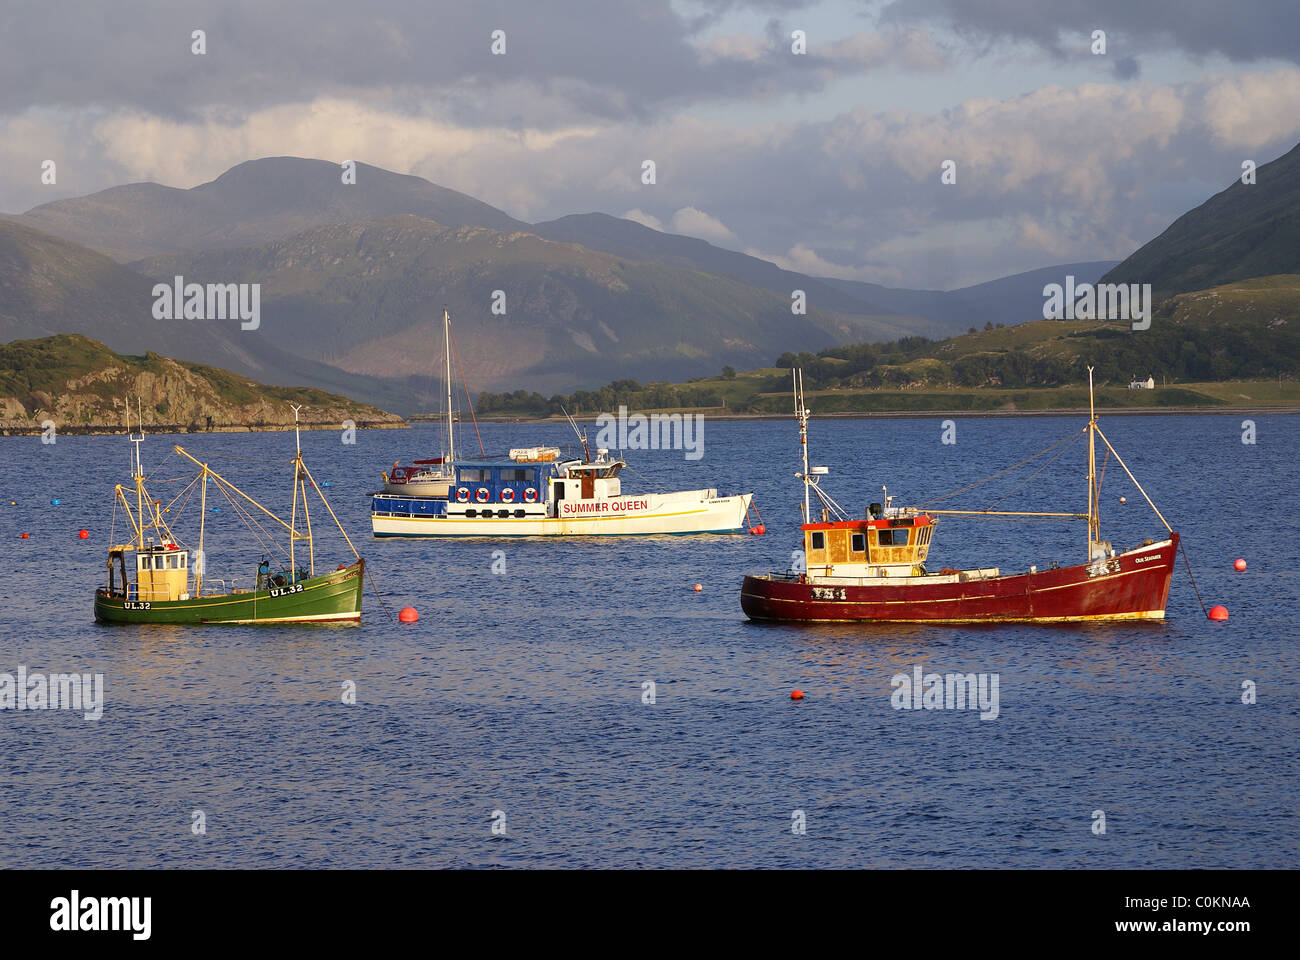 SONY DSC Fishing boats in Loch Broom at Ullapool.  North-West Highlands, Scotland, UK Stock Photo